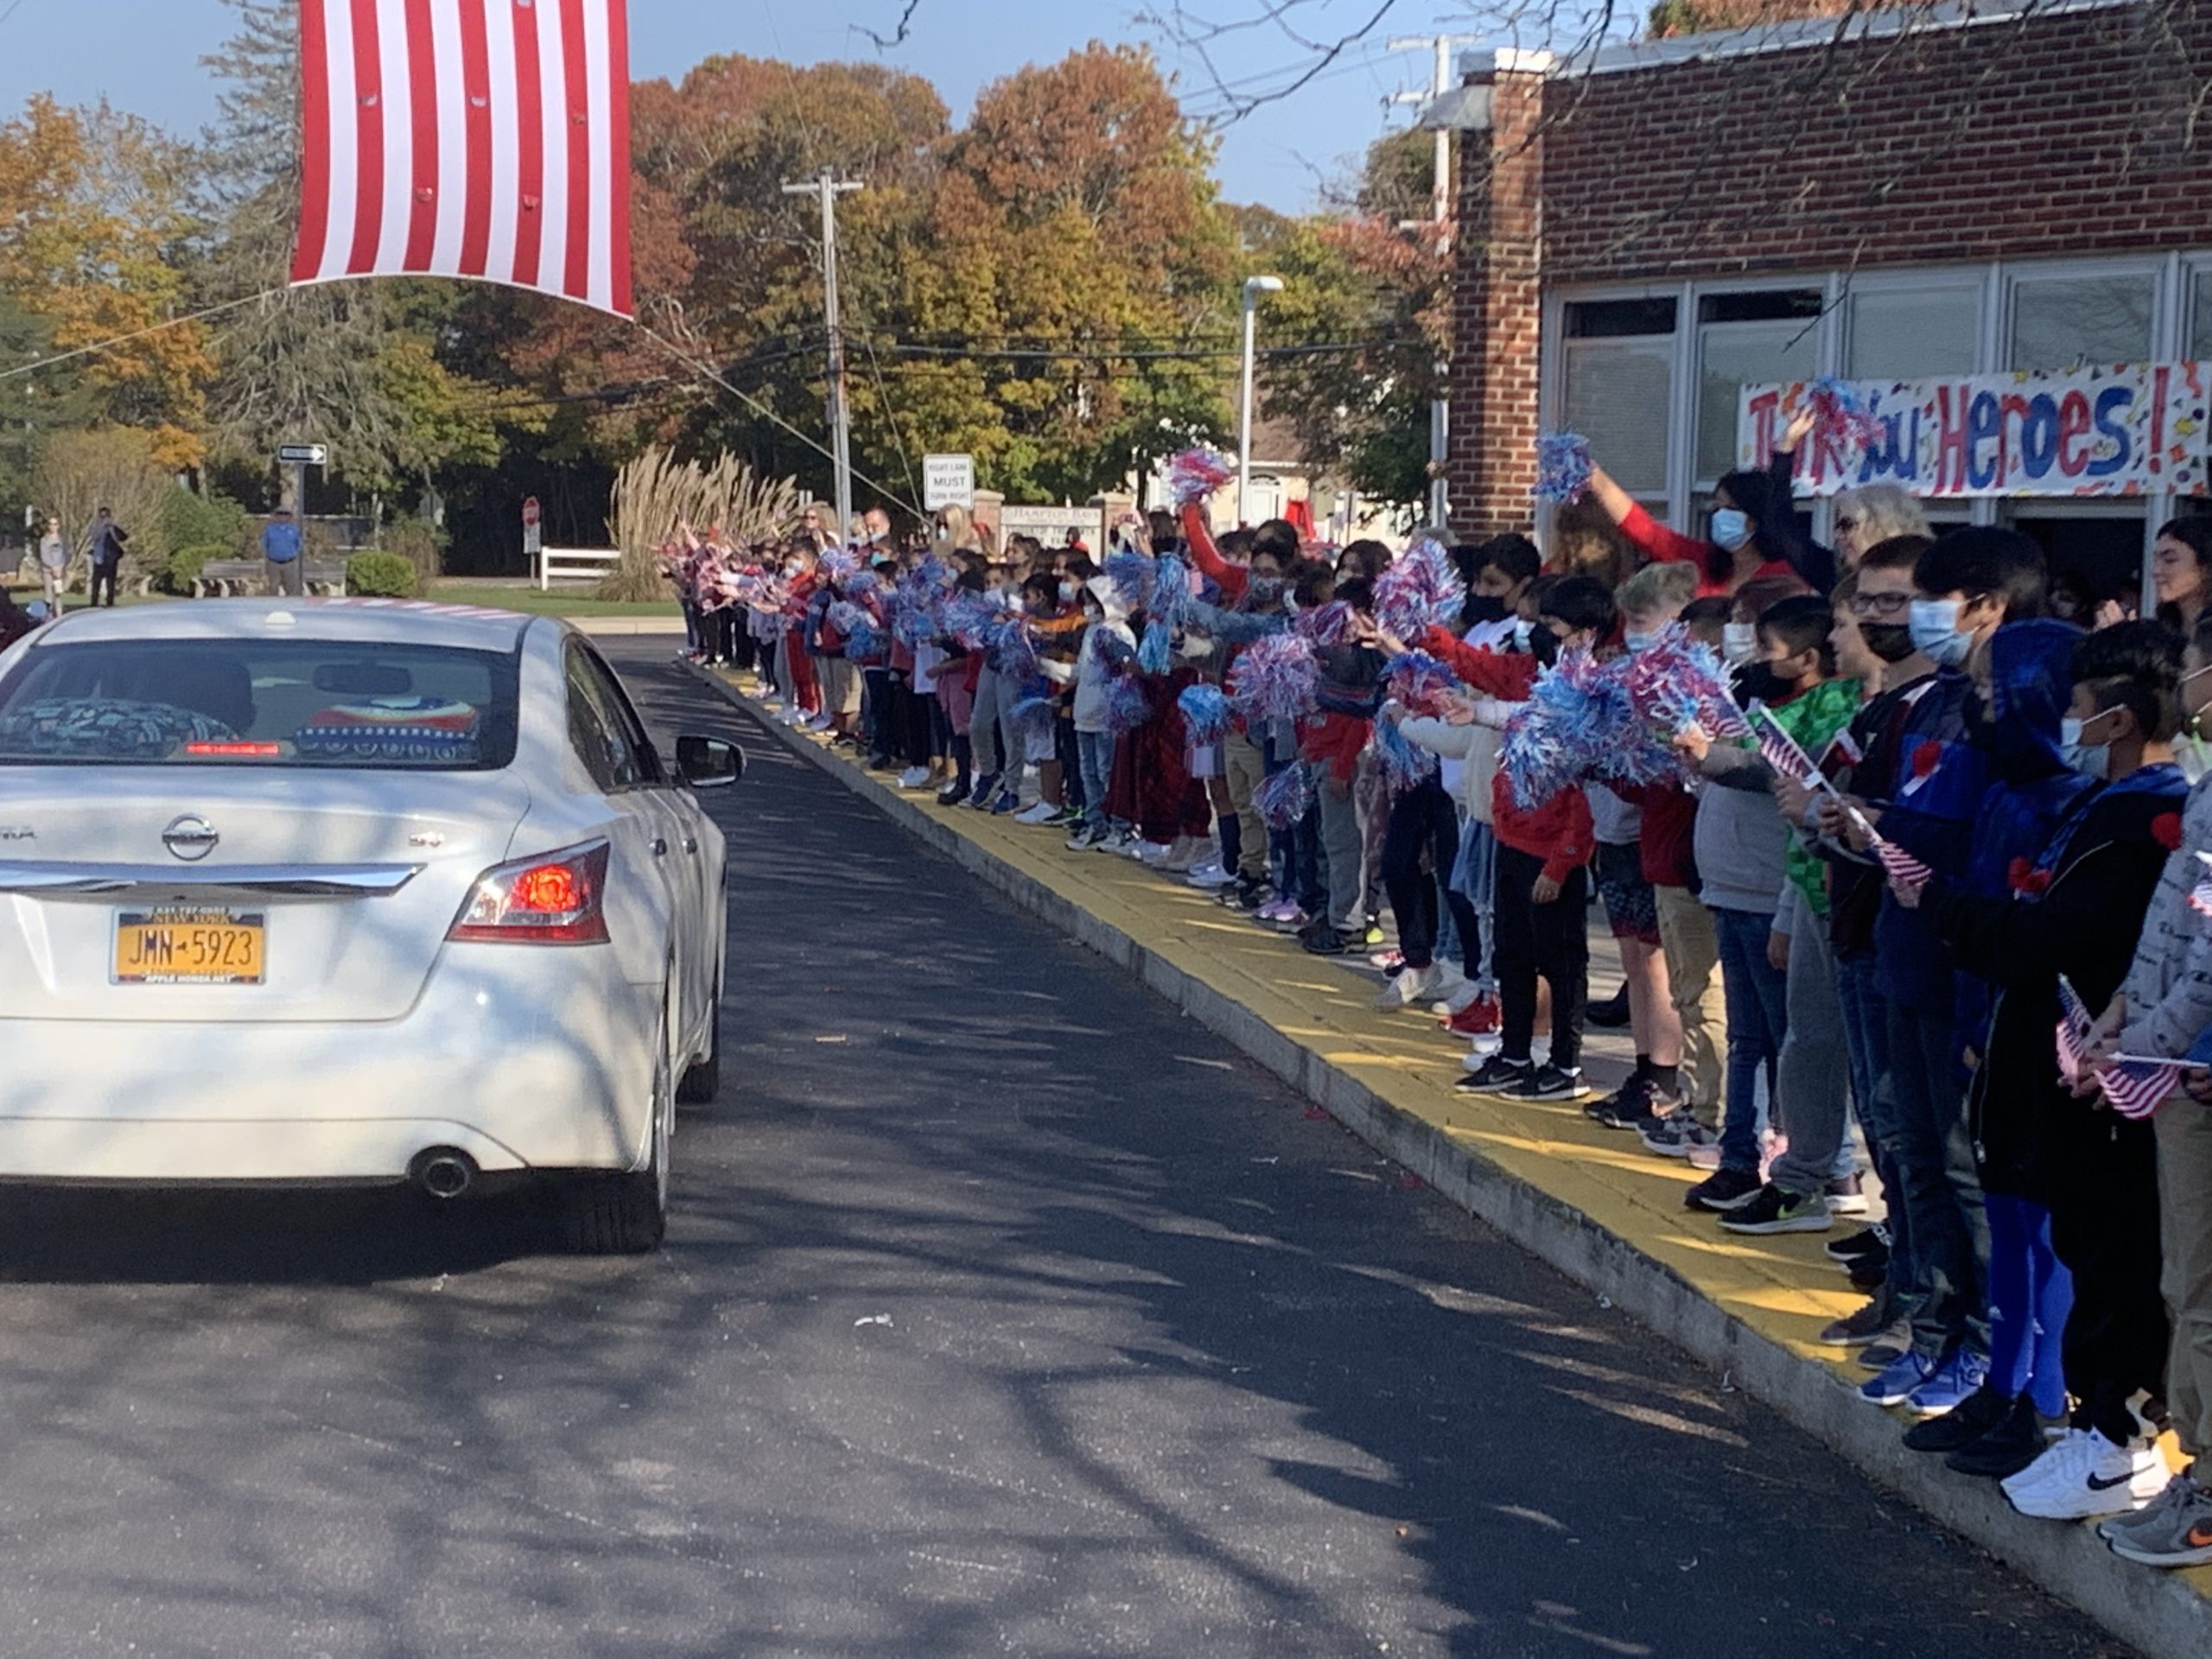 Hampton Bays veterans were honored during the second annual Veterans Day car parade at Hampton Bays Elementary School on November 10. Wearing red, white and blue and waving American flags and pompoms, the district’s fourth graders lined the school’s traffic circle to cheer on the veterans as patriotic music
played in the background. The celebratory parade culminated a week of learning about the importance of Veterans Day. Throughout the week, the students visited the American Legion and wrote songs, poems and essays about the meaning of Veterans Day.